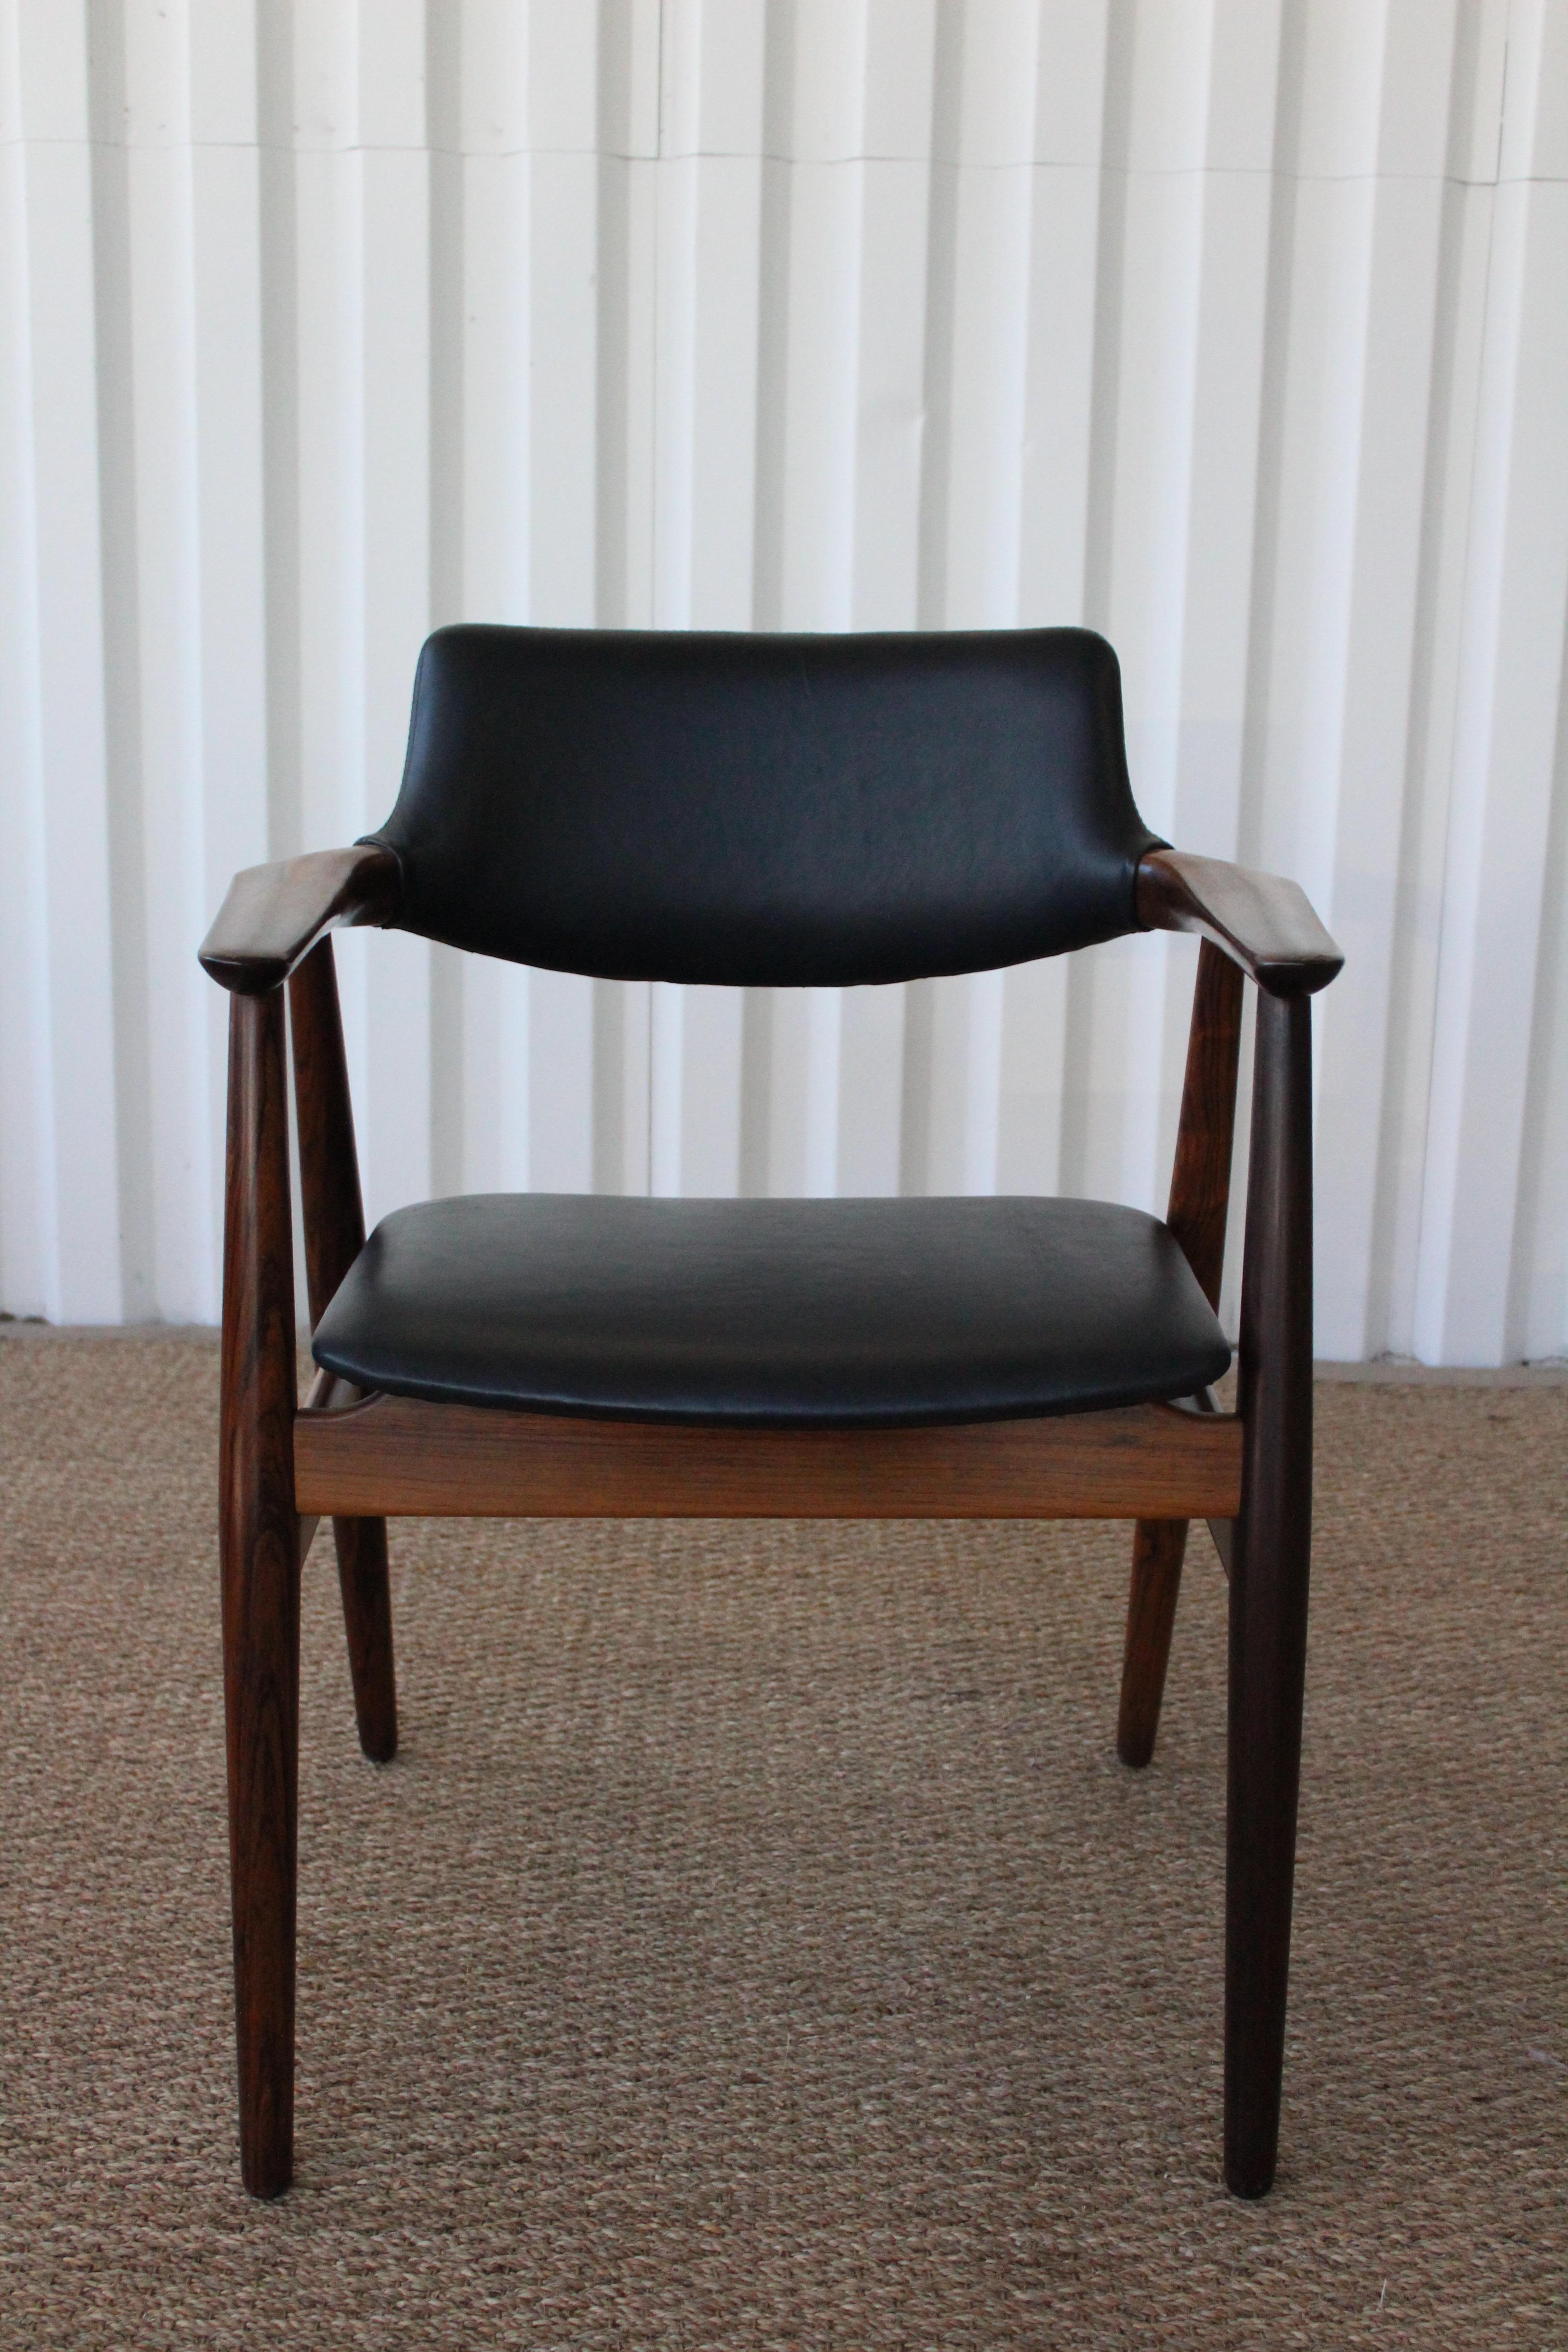 Danish modern armchair designed by Svend Åge Eriksen for Glostrup, 1960. Newly refinished and new leather upholstery.